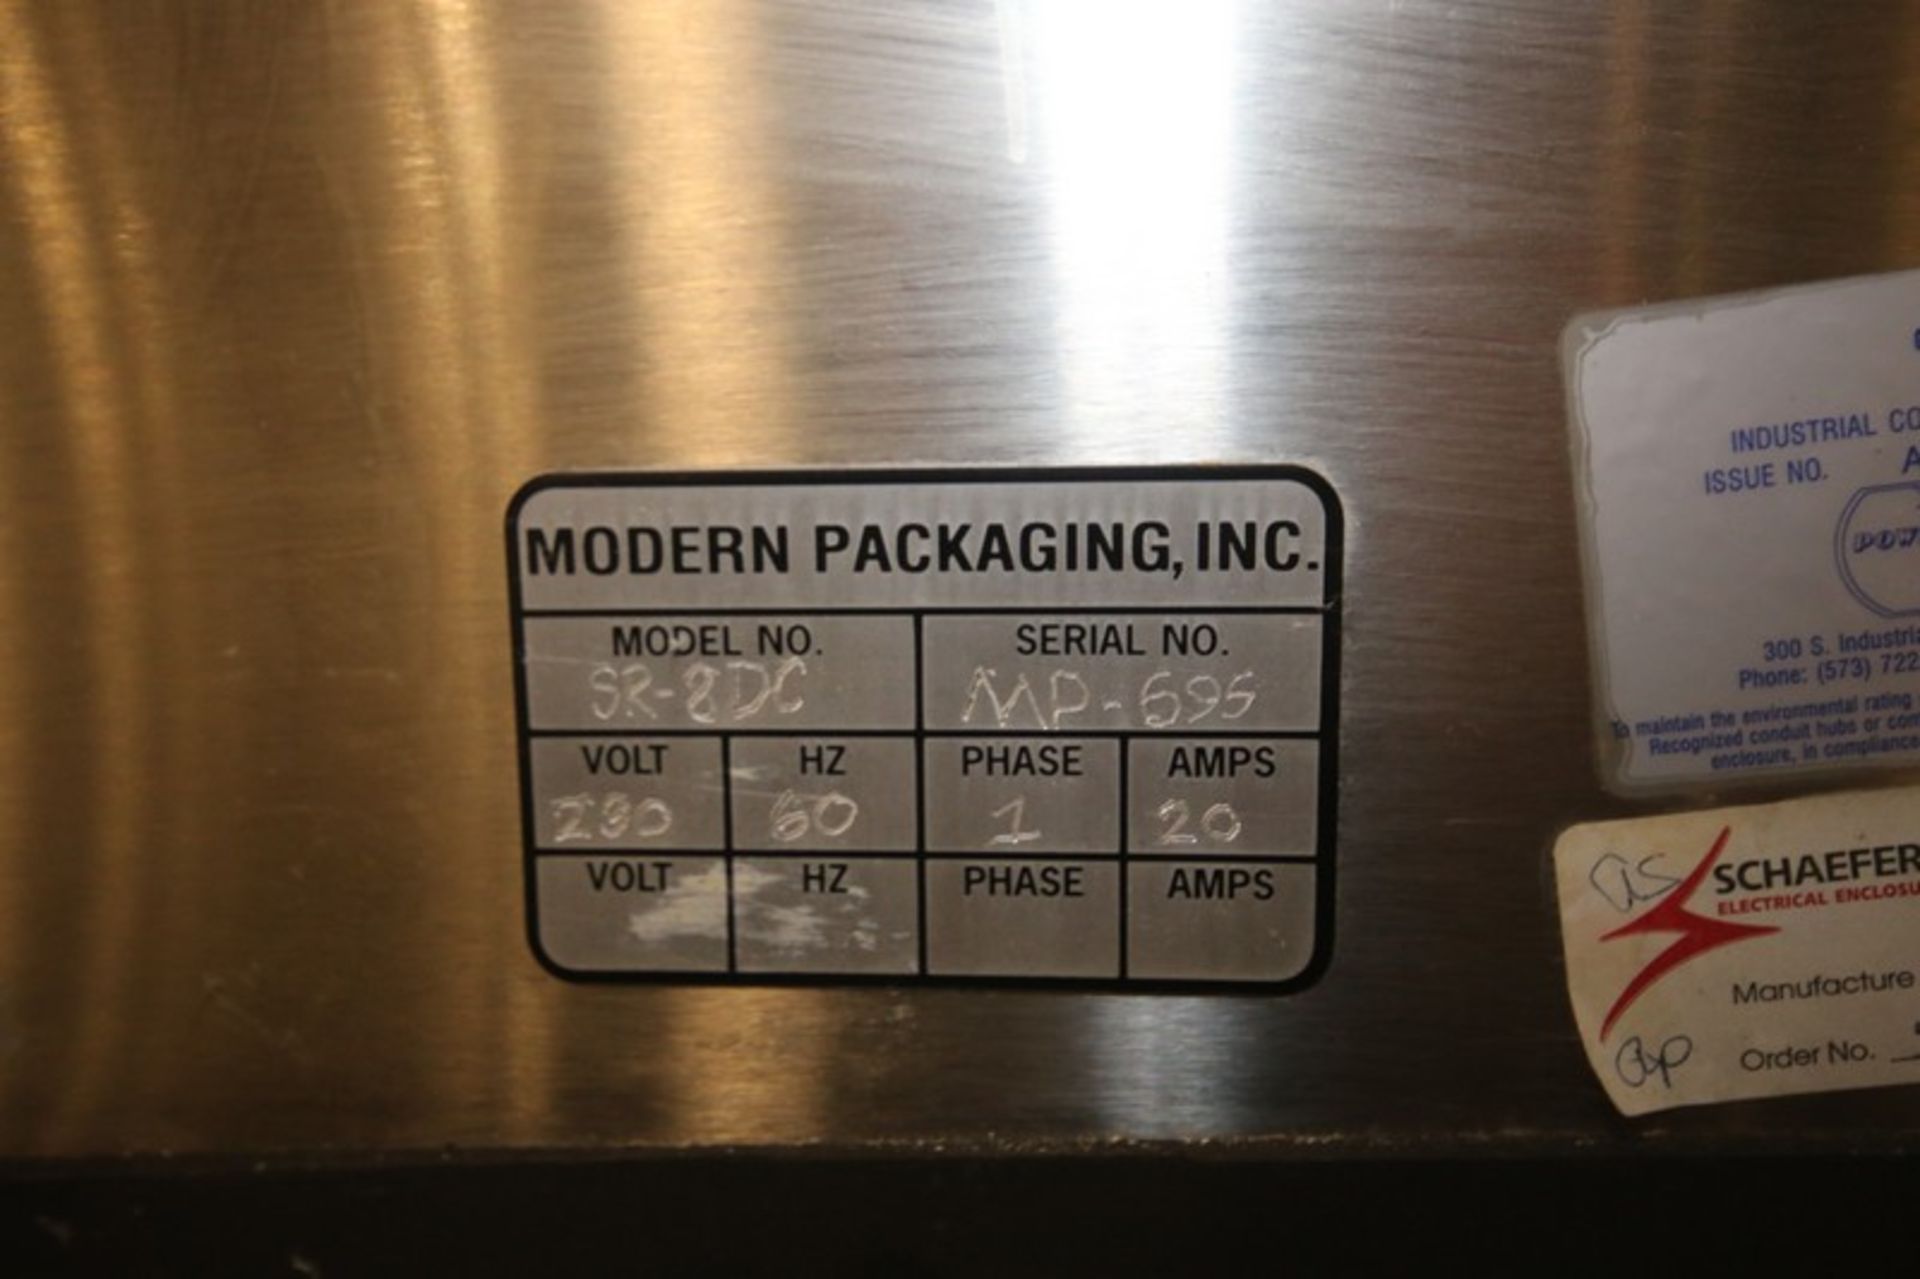 Modern Packaging 8-Station Rotary S/S Cup Filler, Model SR-8DC, SN MP-695, with 2 3/4" Change - Image 11 of 13